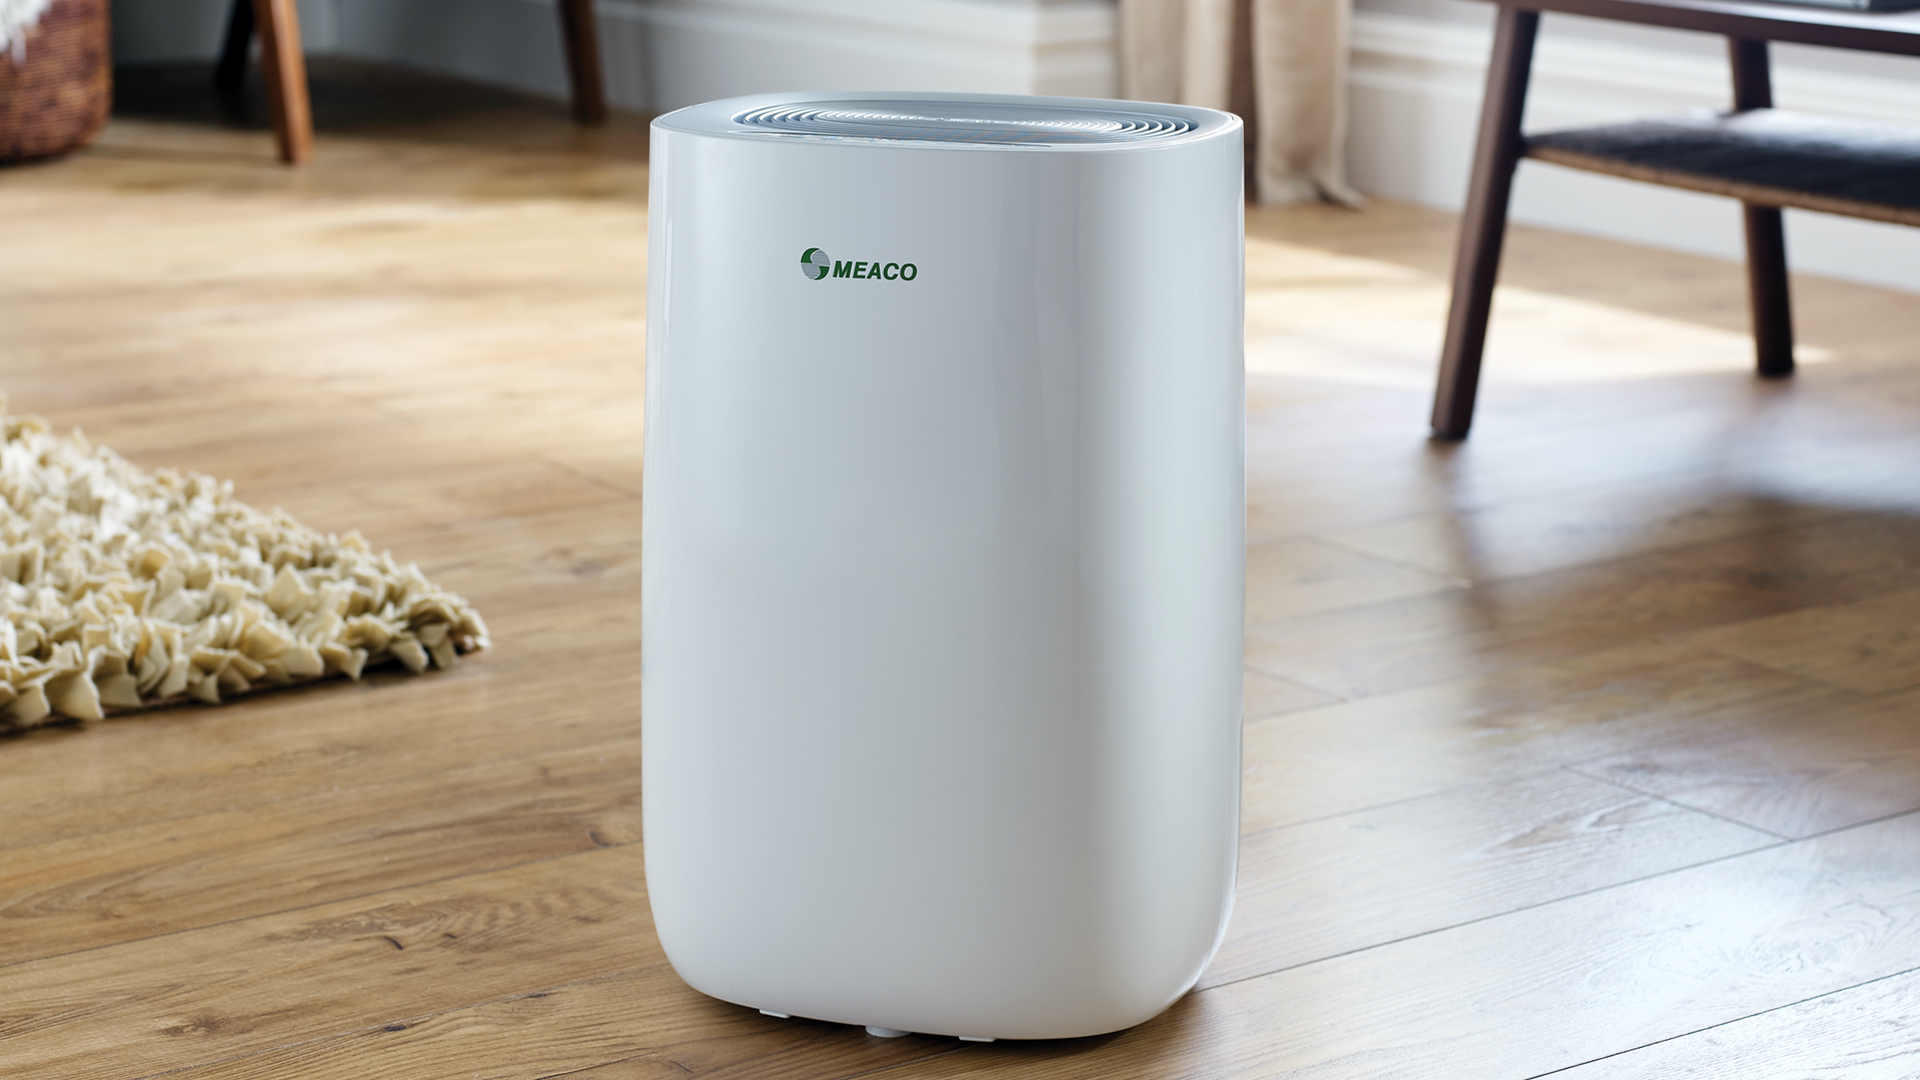 Dehumidifier: Best Dehumidifier for Rooms in India - The Economic Times